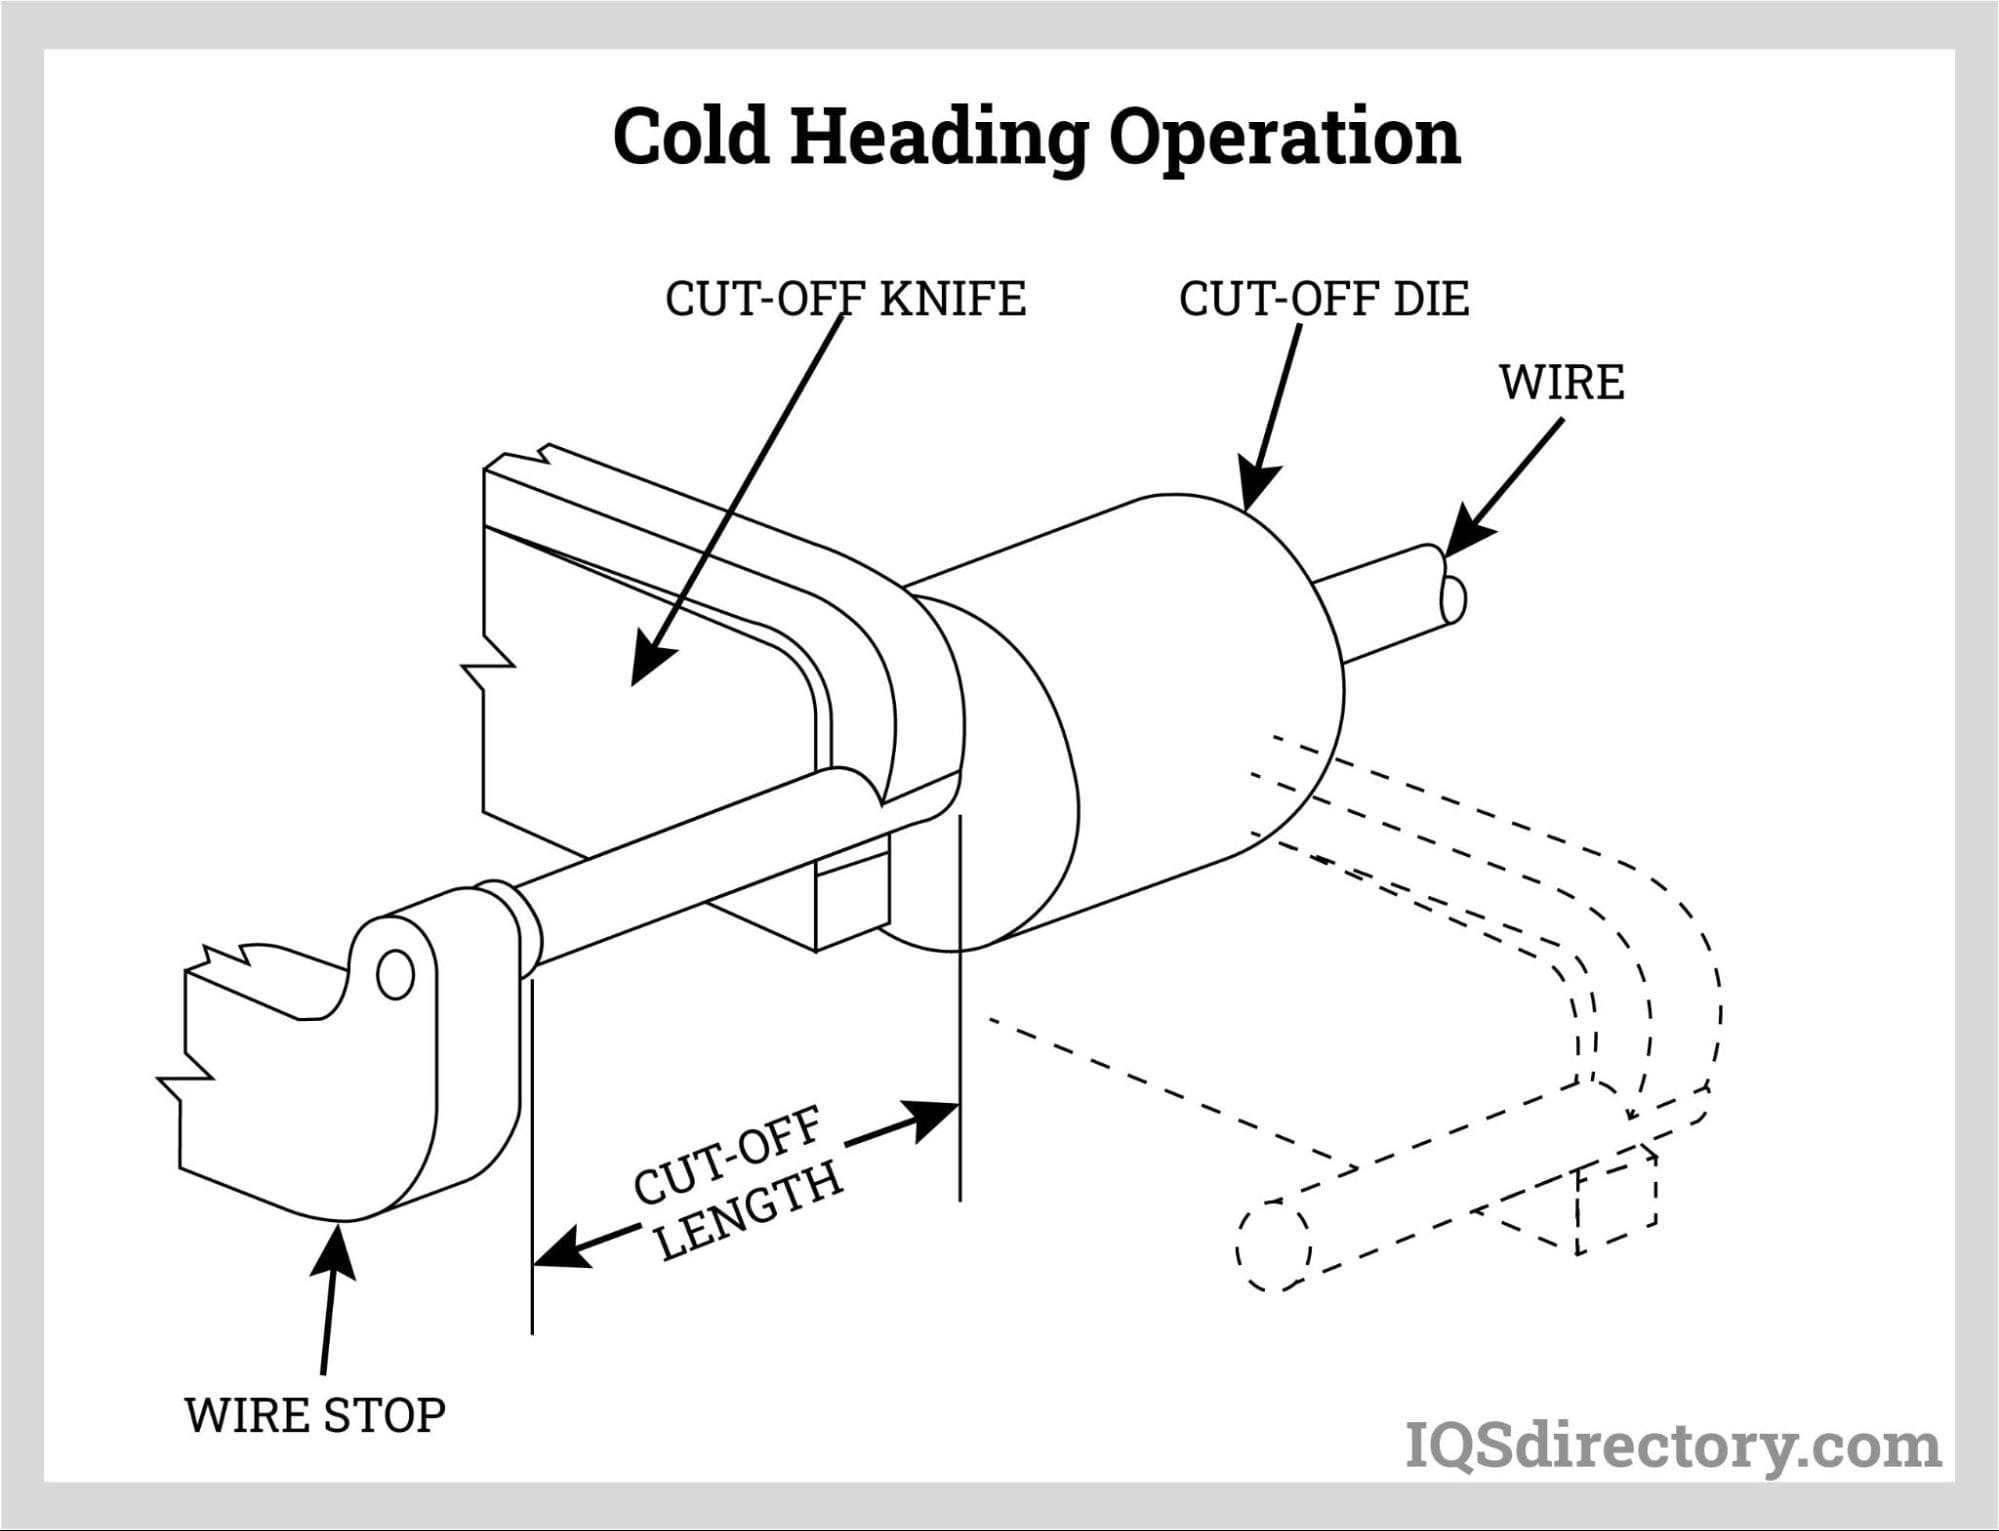 Cold Heading Operation